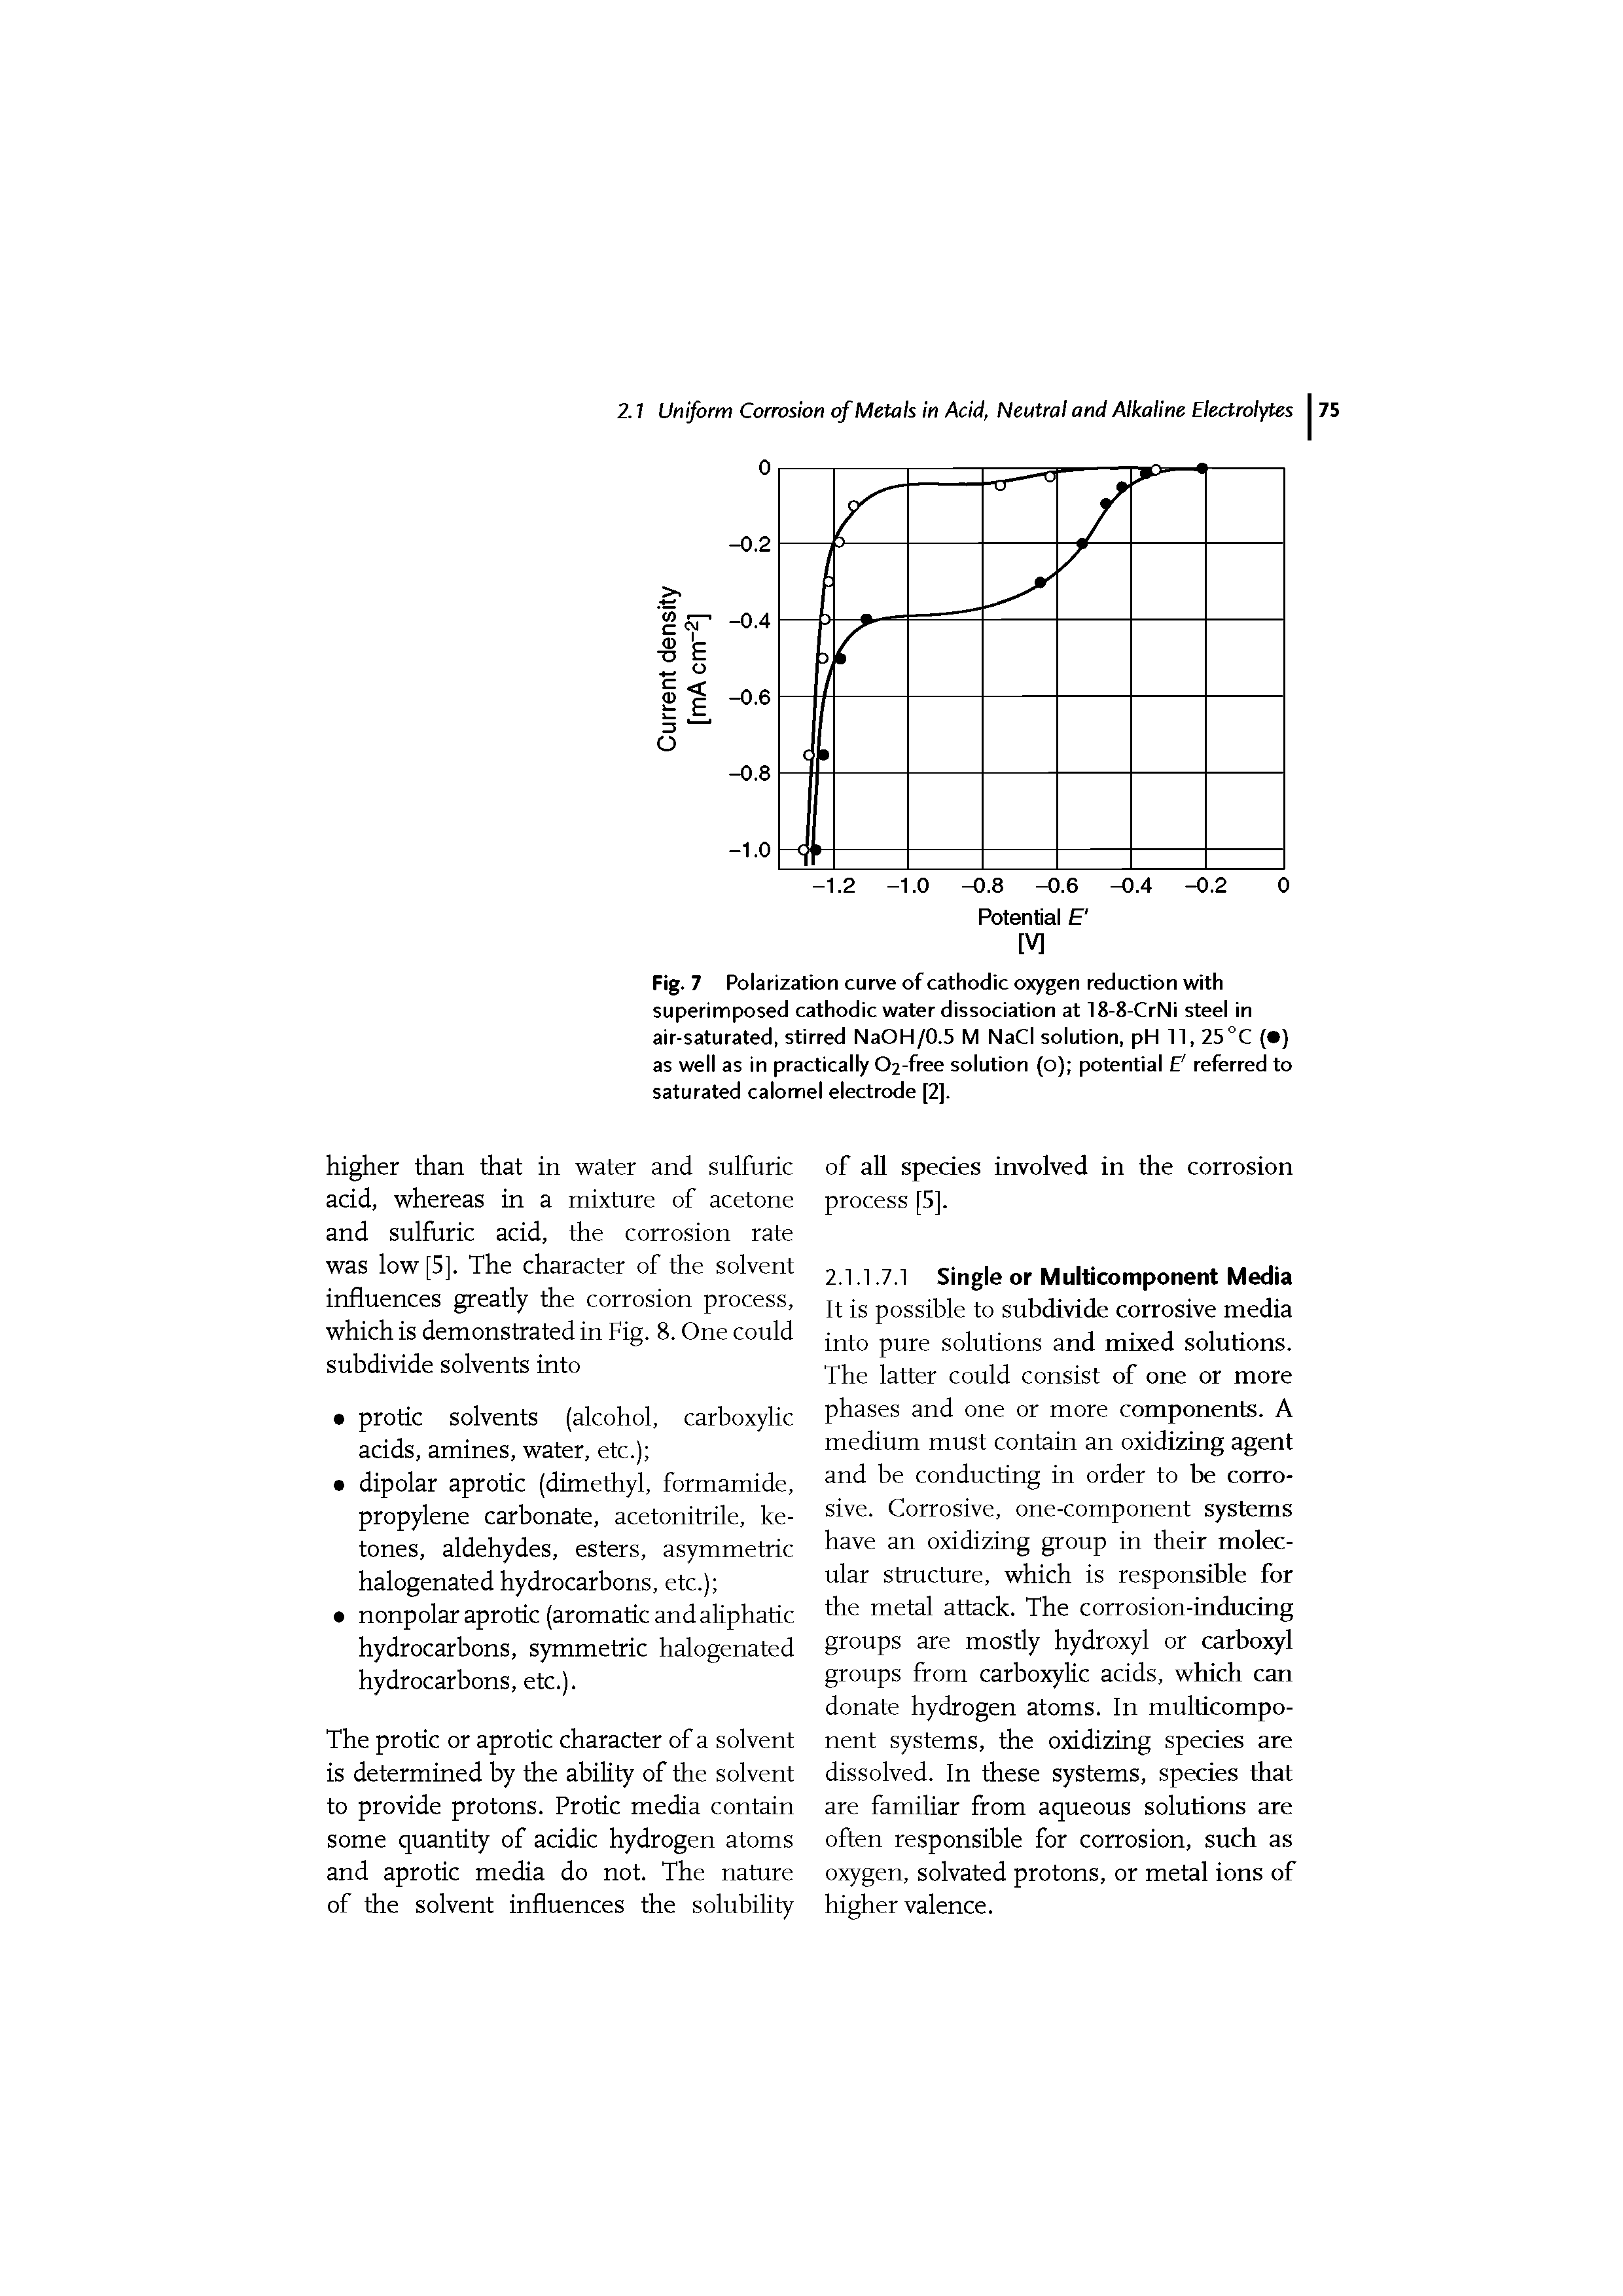 Fig. 7 Polarization curve of cathodic oxygen reduction with superimposed cathodic water dissociation at 18-8-CrNi steel in air-saturated, stirred NaOH/0.5 M NaCi solution, pH 11,25°C ( ) as well as in practically 02-free solution (o) potential referred to saturated calomel electrode [2].